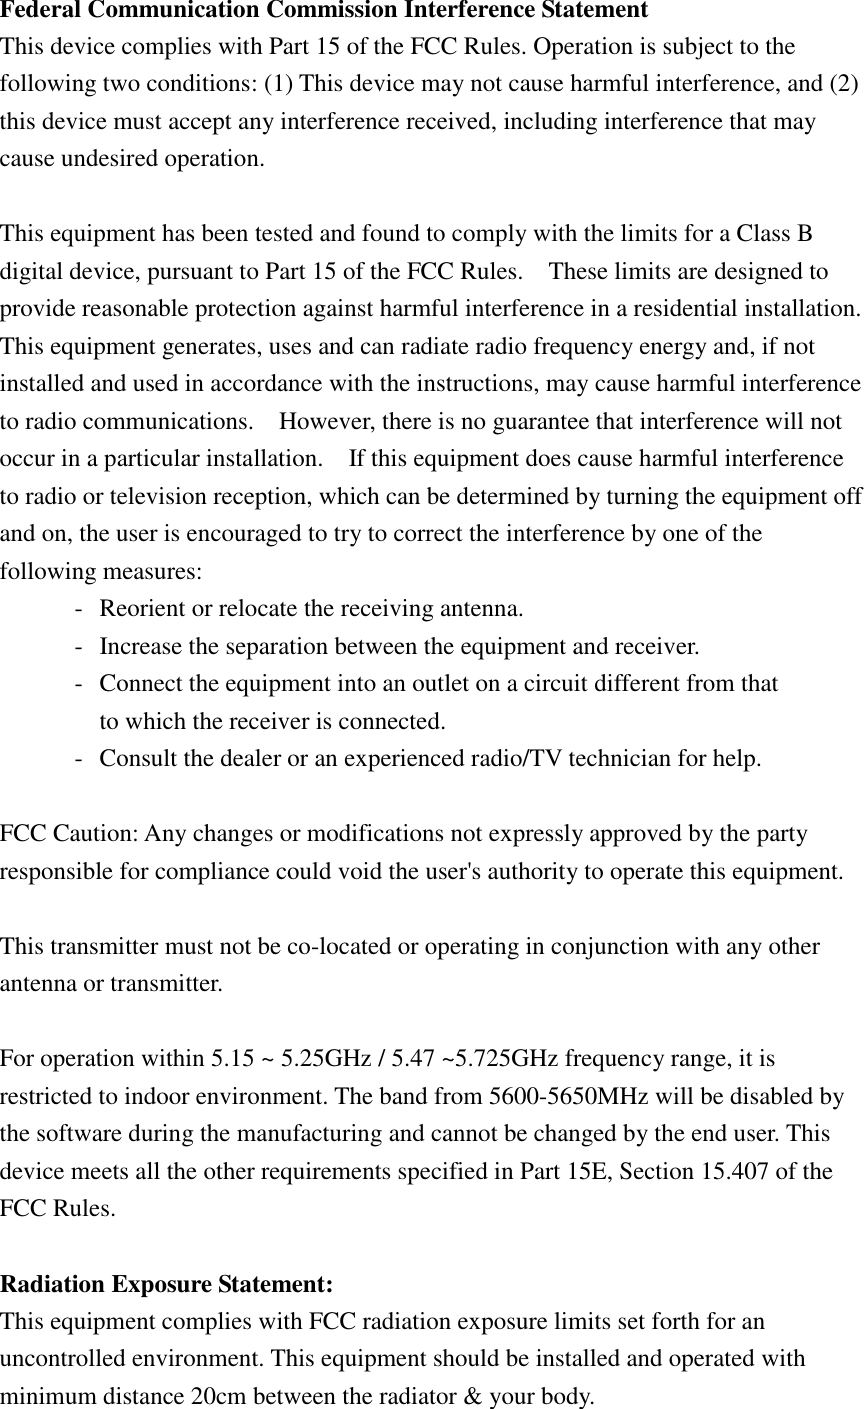 Federal Communication Commission Interference Statement This device complies with Part 15 of the FCC Rules. Operation is subject to the following two conditions: (1) This device may not cause harmful interference, and (2) this device must accept any interference received, including interference that may cause undesired operation.  This equipment has been tested and found to comply with the limits for a Class B digital device, pursuant to Part 15 of the FCC Rules.    These limits are designed to provide reasonable protection against harmful interference in a residential installation. This equipment generates, uses and can radiate radio frequency energy and, if not installed and used in accordance with the instructions, may cause harmful interference to radio communications.    However, there is no guarantee that interference will not occur in a particular installation.    If this equipment does cause harmful interference to radio or television reception, which can be determined by turning the equipment off and on, the user is encouraged to try to correct the interference by one of the following measures: -  Reorient or relocate the receiving antenna. -  Increase the separation between the equipment and receiver. -  Connect the equipment into an outlet on a circuit different from that to which the receiver is connected. -  Consult the dealer or an experienced radio/TV technician for help.  FCC Caution: Any changes or modifications not expressly approved by the party responsible for compliance could void the user&apos;s authority to operate this equipment.  This transmitter must not be co-located or operating in conjunction with any other antenna or transmitter.  For operation within 5.15 ~ 5.25GHz / 5.47 ~5.725GHz frequency range, it is restricted to indoor environment. The band from 5600-5650MHz will be disabled by the software during the manufacturing and cannot be changed by the end user. This device meets all the other requirements specified in Part 15E, Section 15.407 of the FCC Rules.  Radiation Exposure Statement: This equipment complies with FCC radiation exposure limits set forth for an uncontrolled environment. This equipment should be installed and operated with minimum distance 20cm between the radiator &amp; your body. 